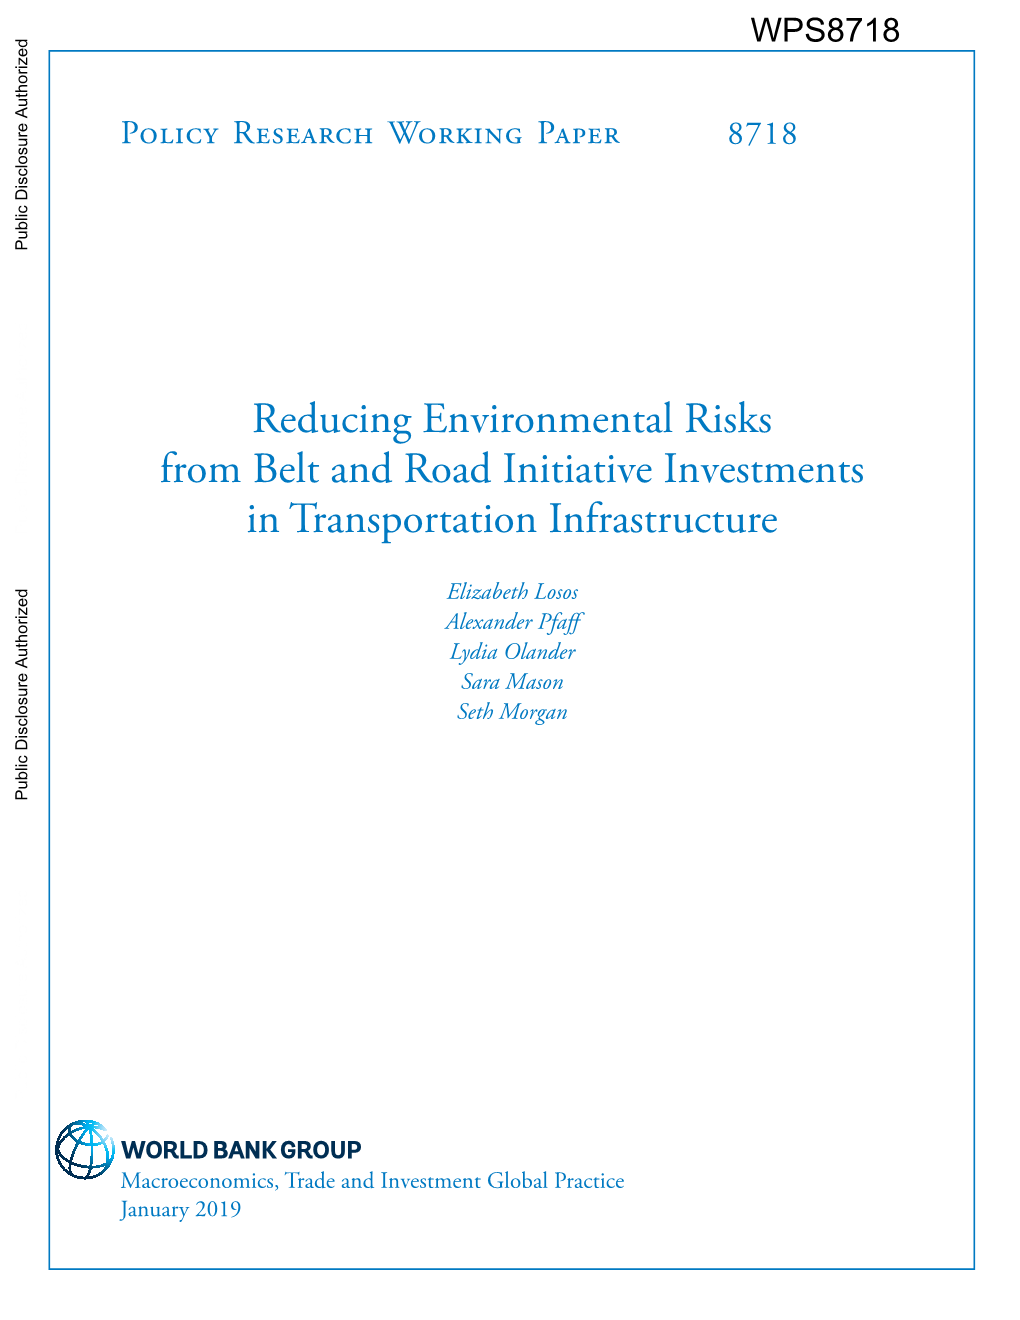 Reducing Environmental Risks from Belt and Road Initiative Investments